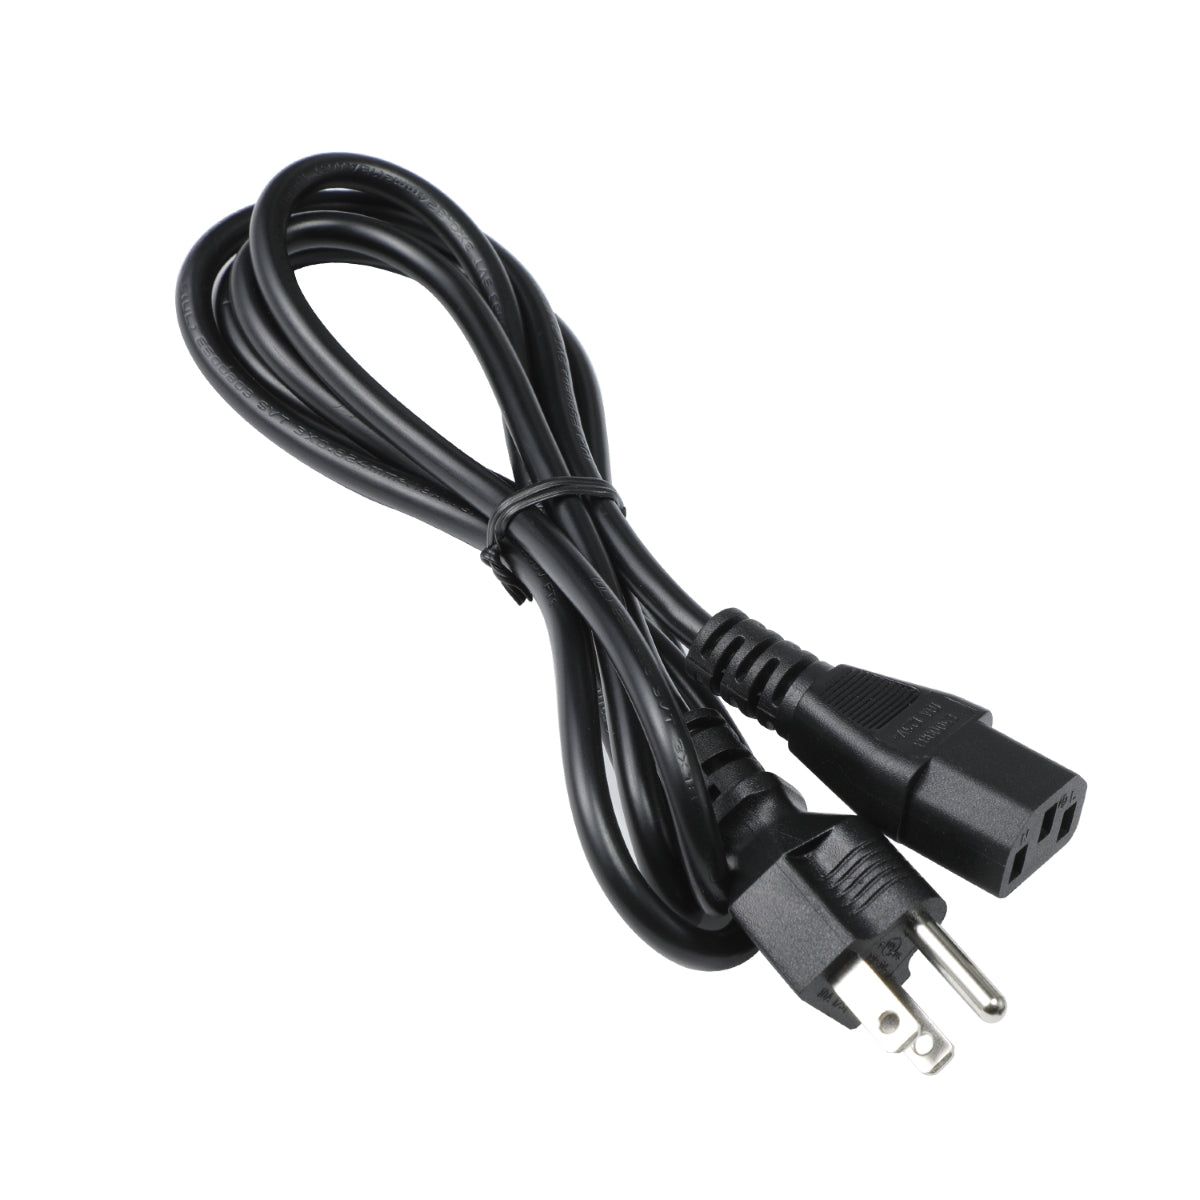 Power Cord for LG 43UD79-B TV.